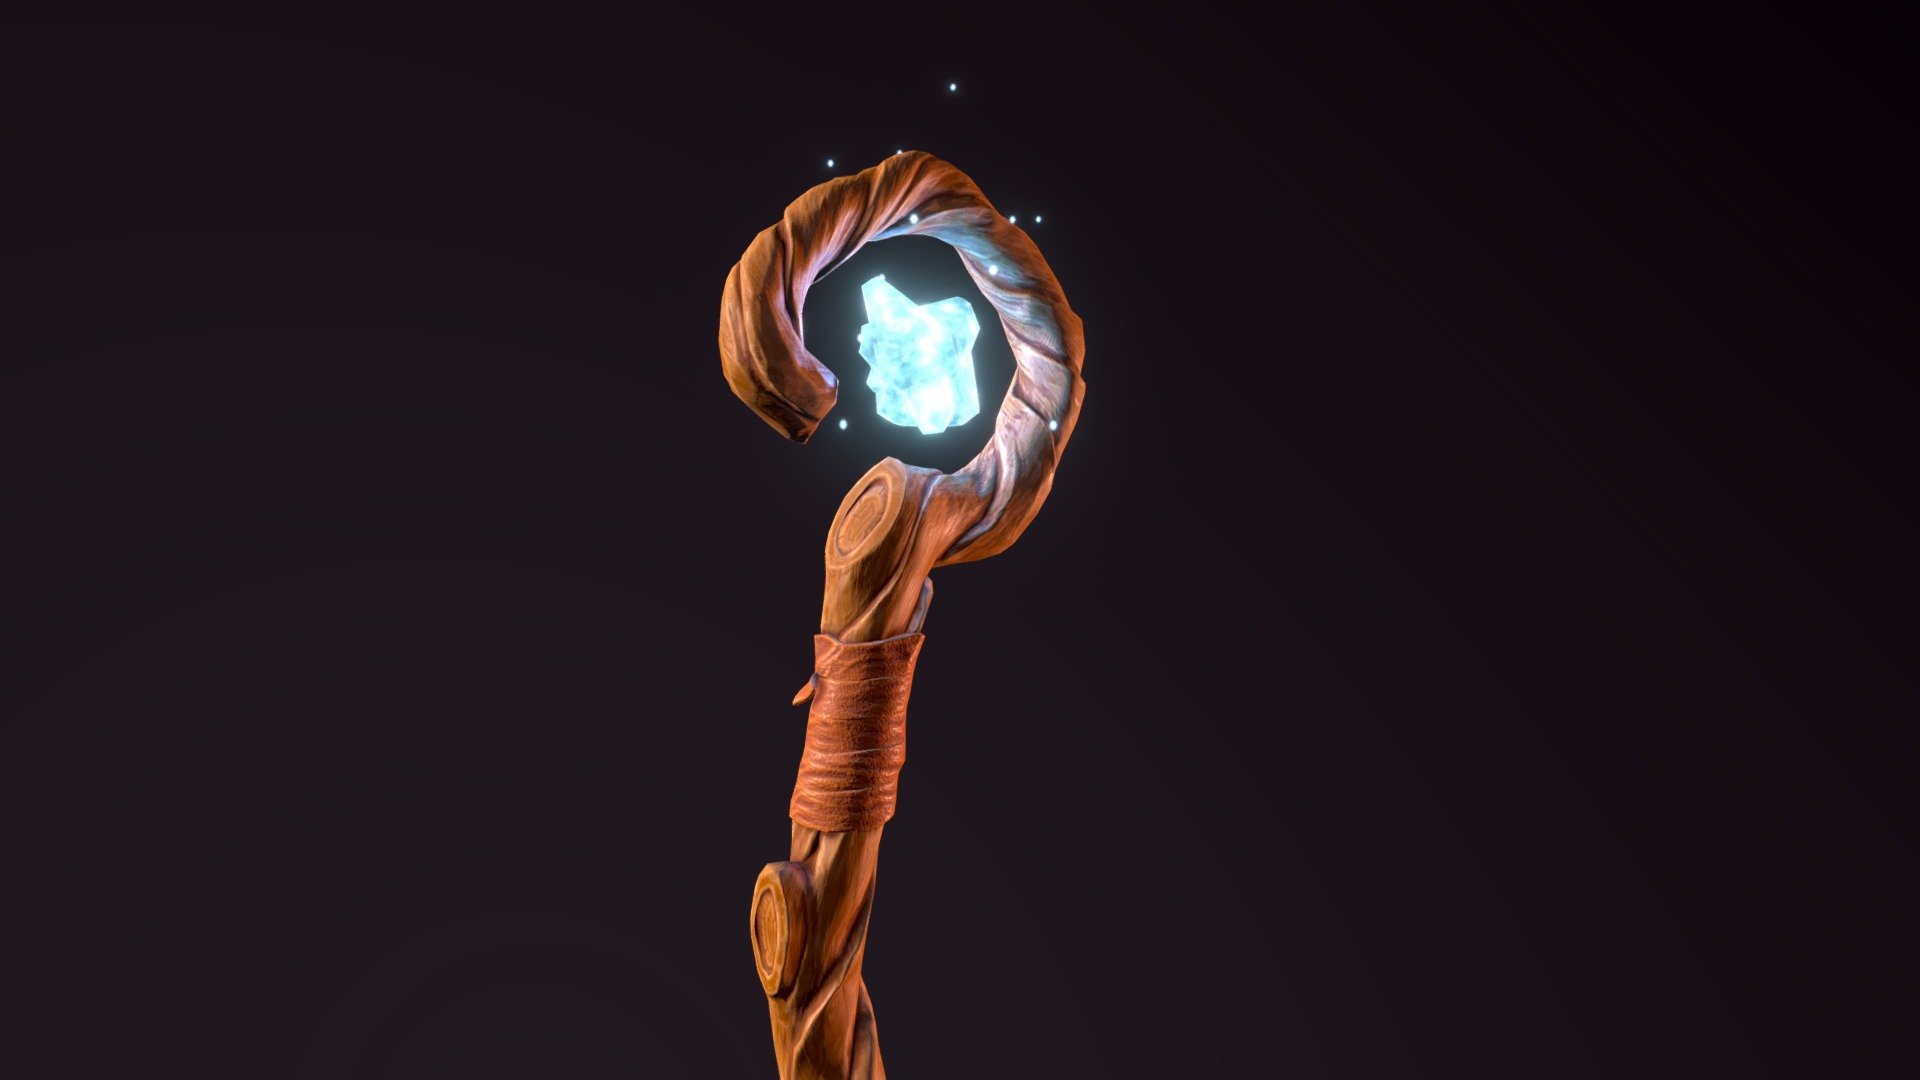 A mage staff to test out Blender 2.8 and Sculpt branch features. I published it in ArtStation aswell and rendered it a bit differently using Marmoset Toolbag 3.
https://www.artstation.com/artwork/Ka9Bxr - Mage Staff - 3D model by Ponkke 3d model